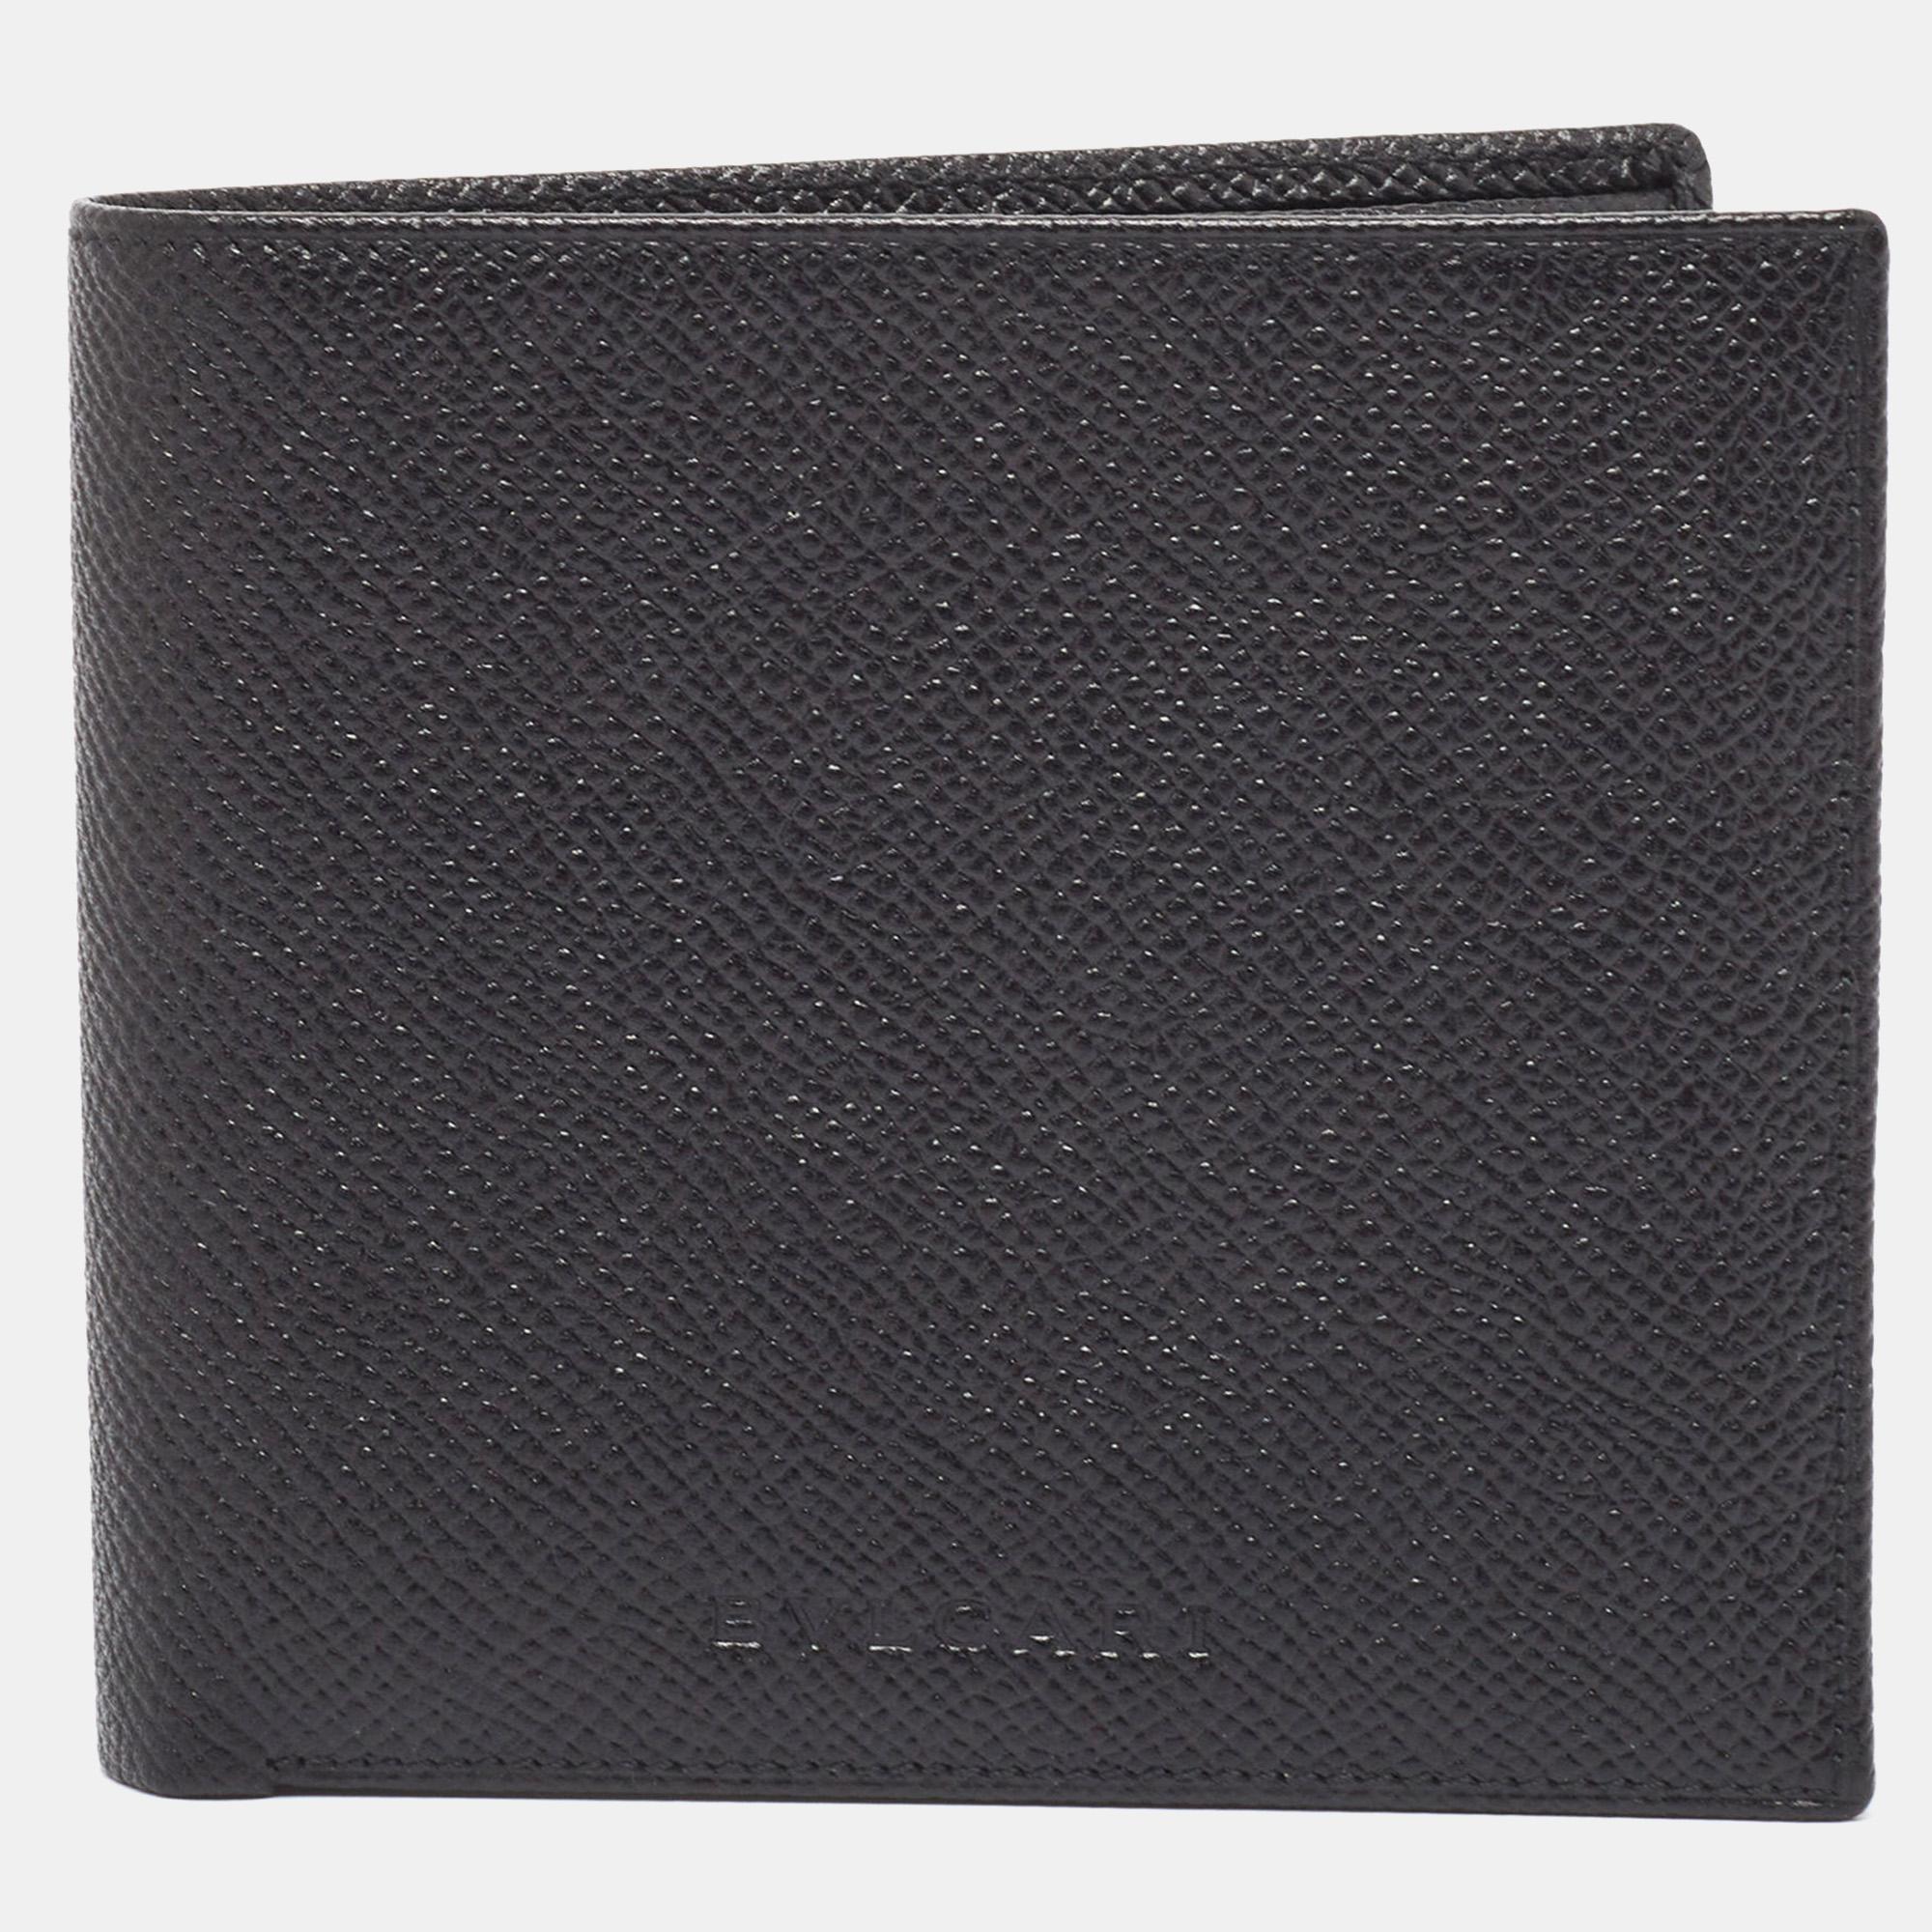 This wallet from Bvlgari brings along a touch of luxury and immense style. It comes crafted from leather and designed as a bifold with the logo on the front. It is equipped with compartments and multiple slots so you can neatly carry your cards and